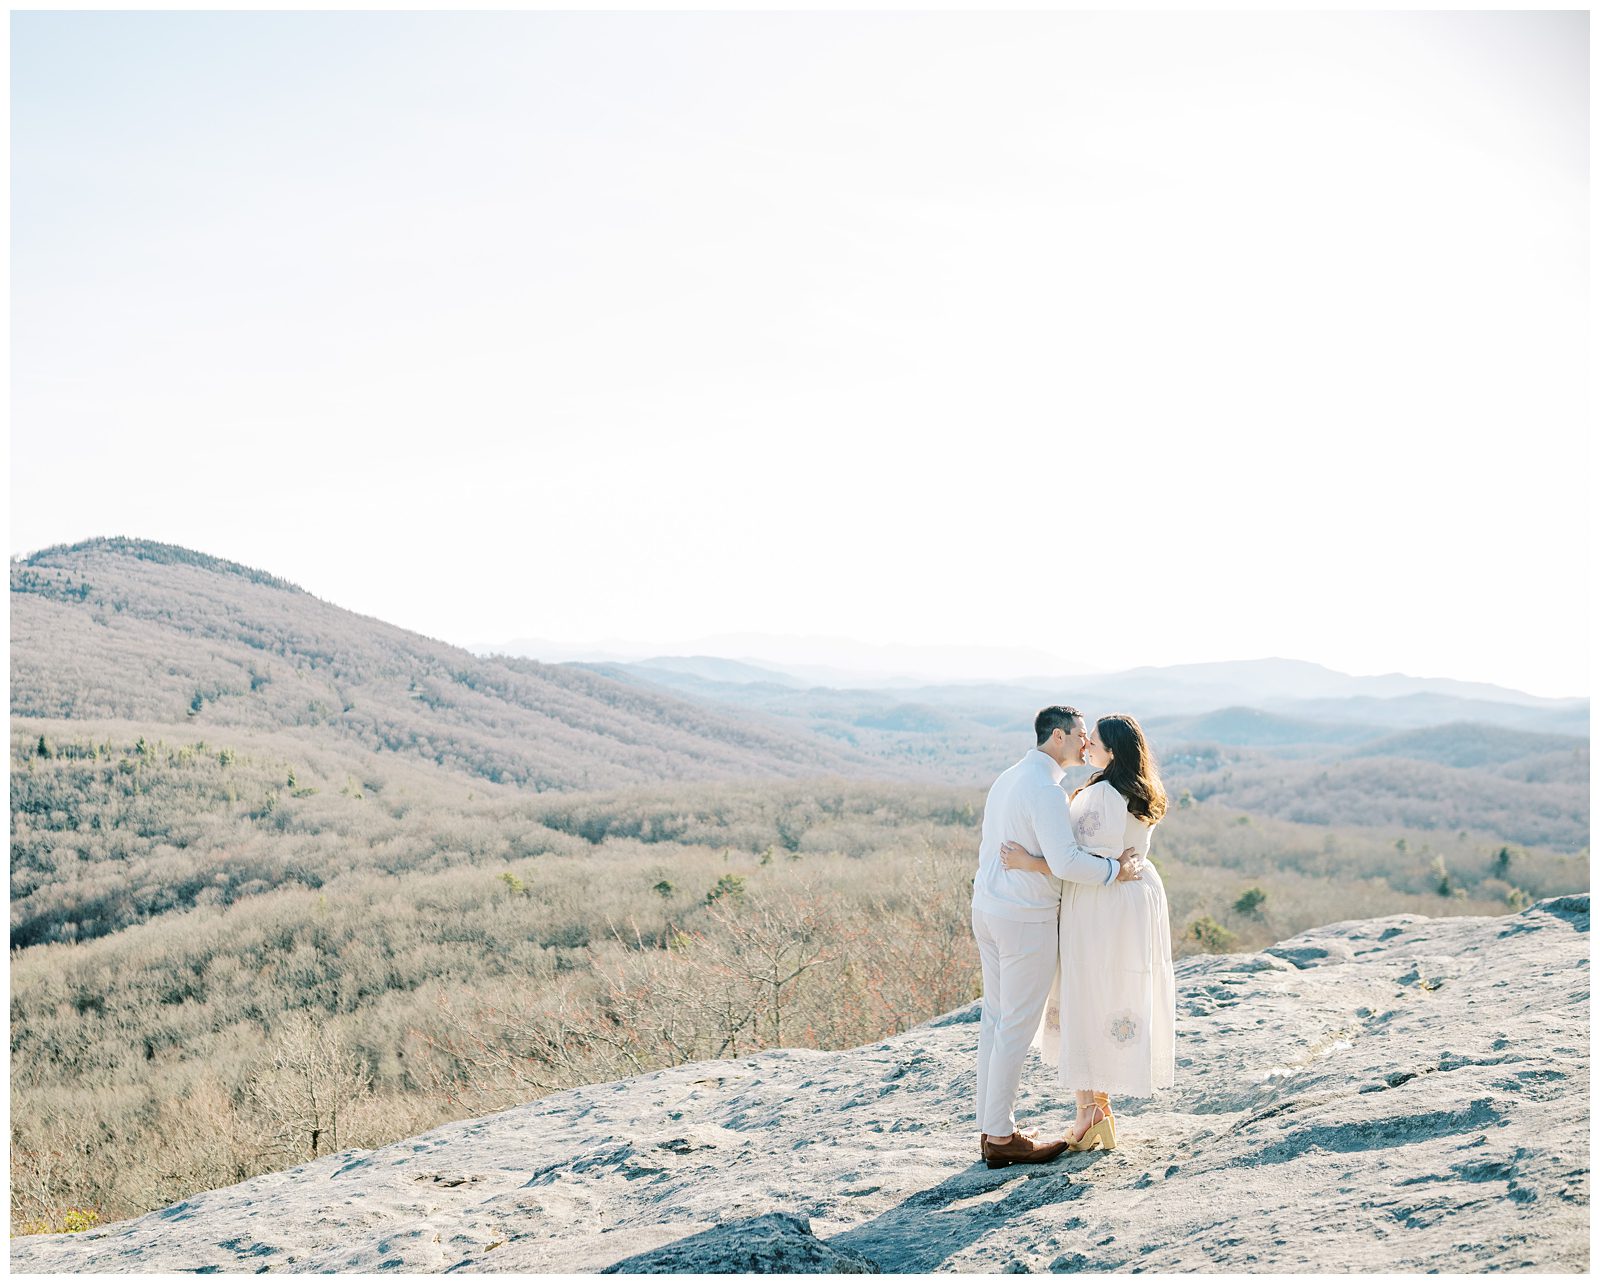 Engagement photos in the mountains of North Carolina